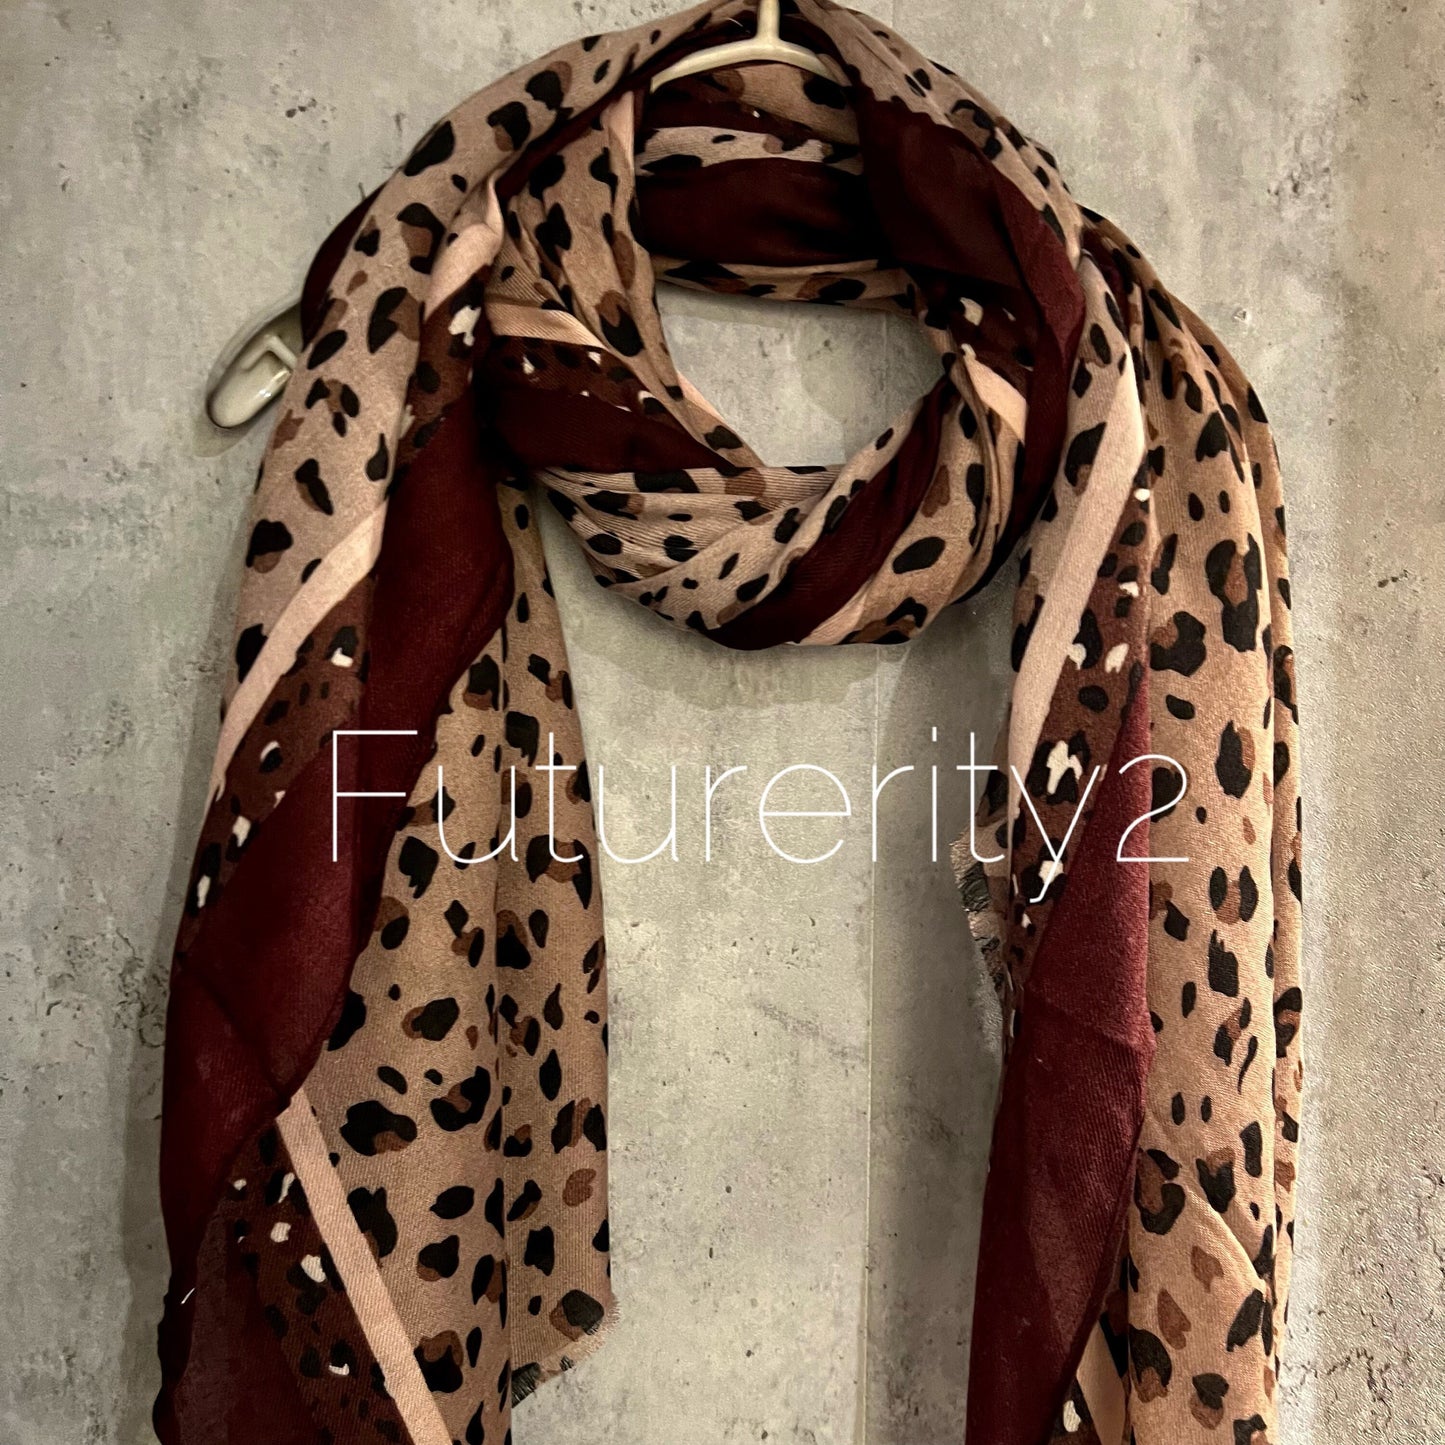 Leopard Pattern With Brown Trim Beige Cotton Scarf/Summer  Autumn Scarf/Scarf Women/Gifts For Mum/Gifts For Her Birthday Christmas/UK Seller